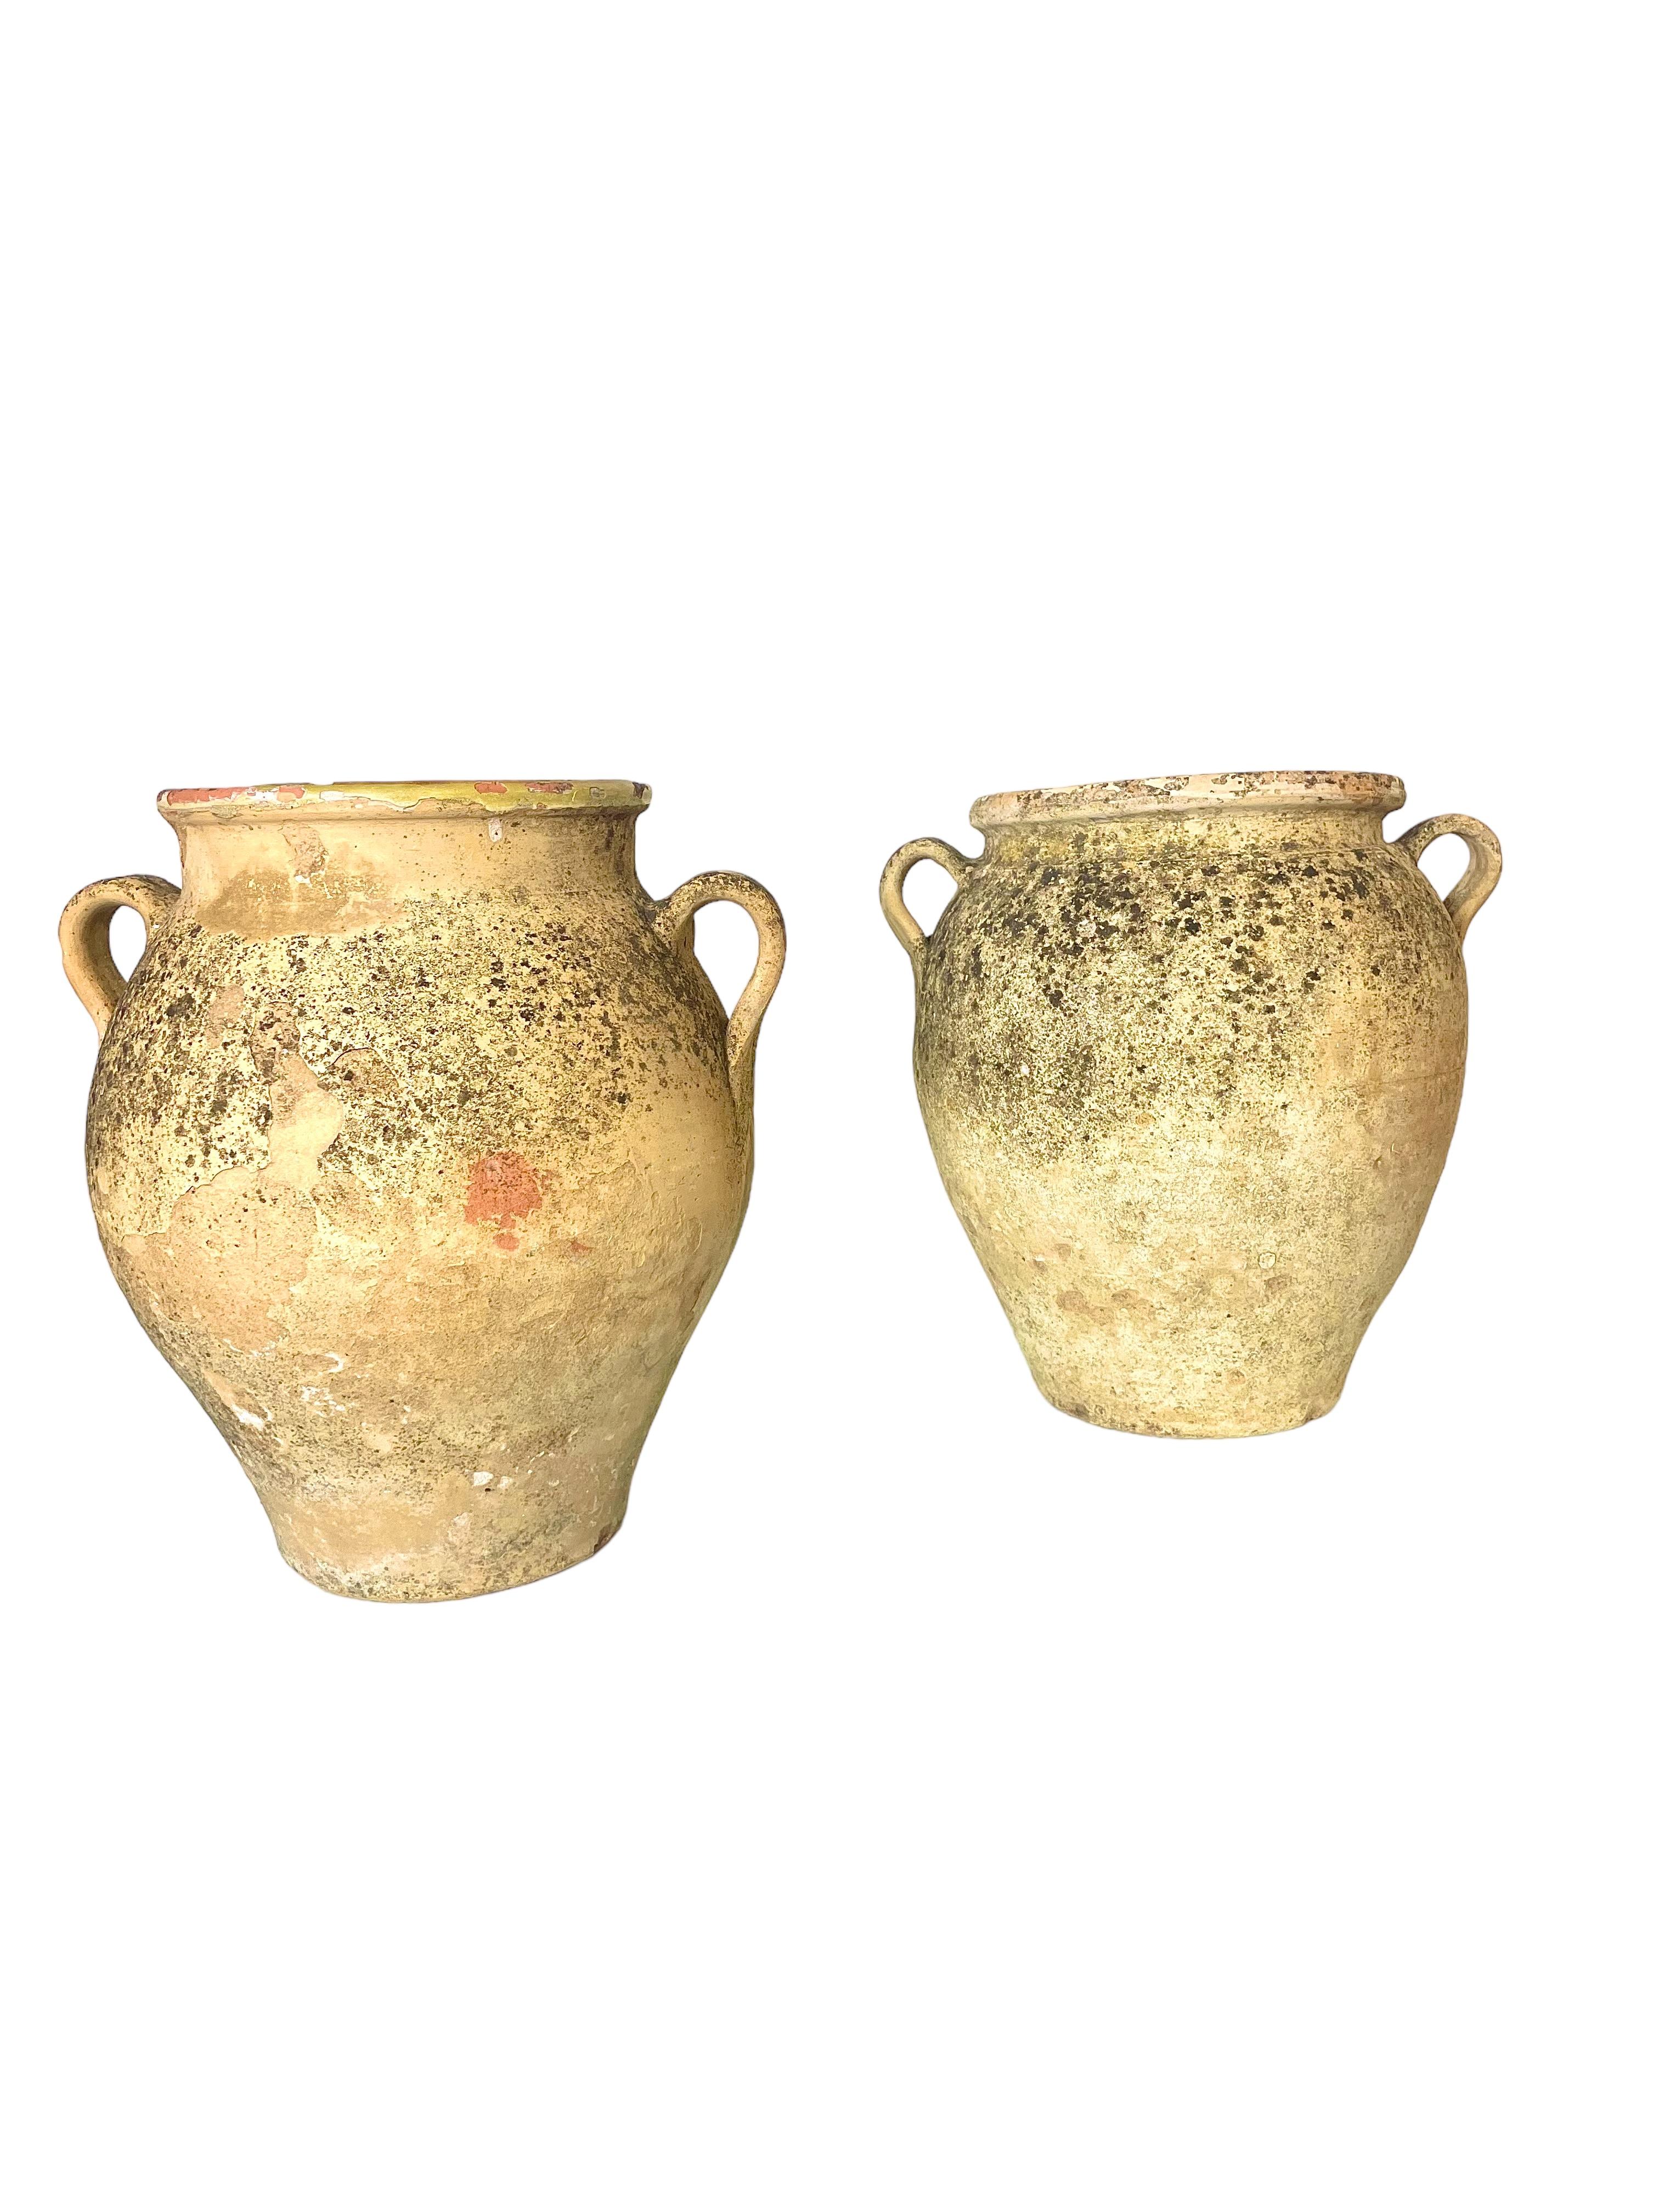 A very attractive pair of provencial French Confit Pots, each with two side handles, and glazed internally. Light in colour, their exterior surfaces are beautifully aged, and full of character. Once used in a southern French kitchen for the